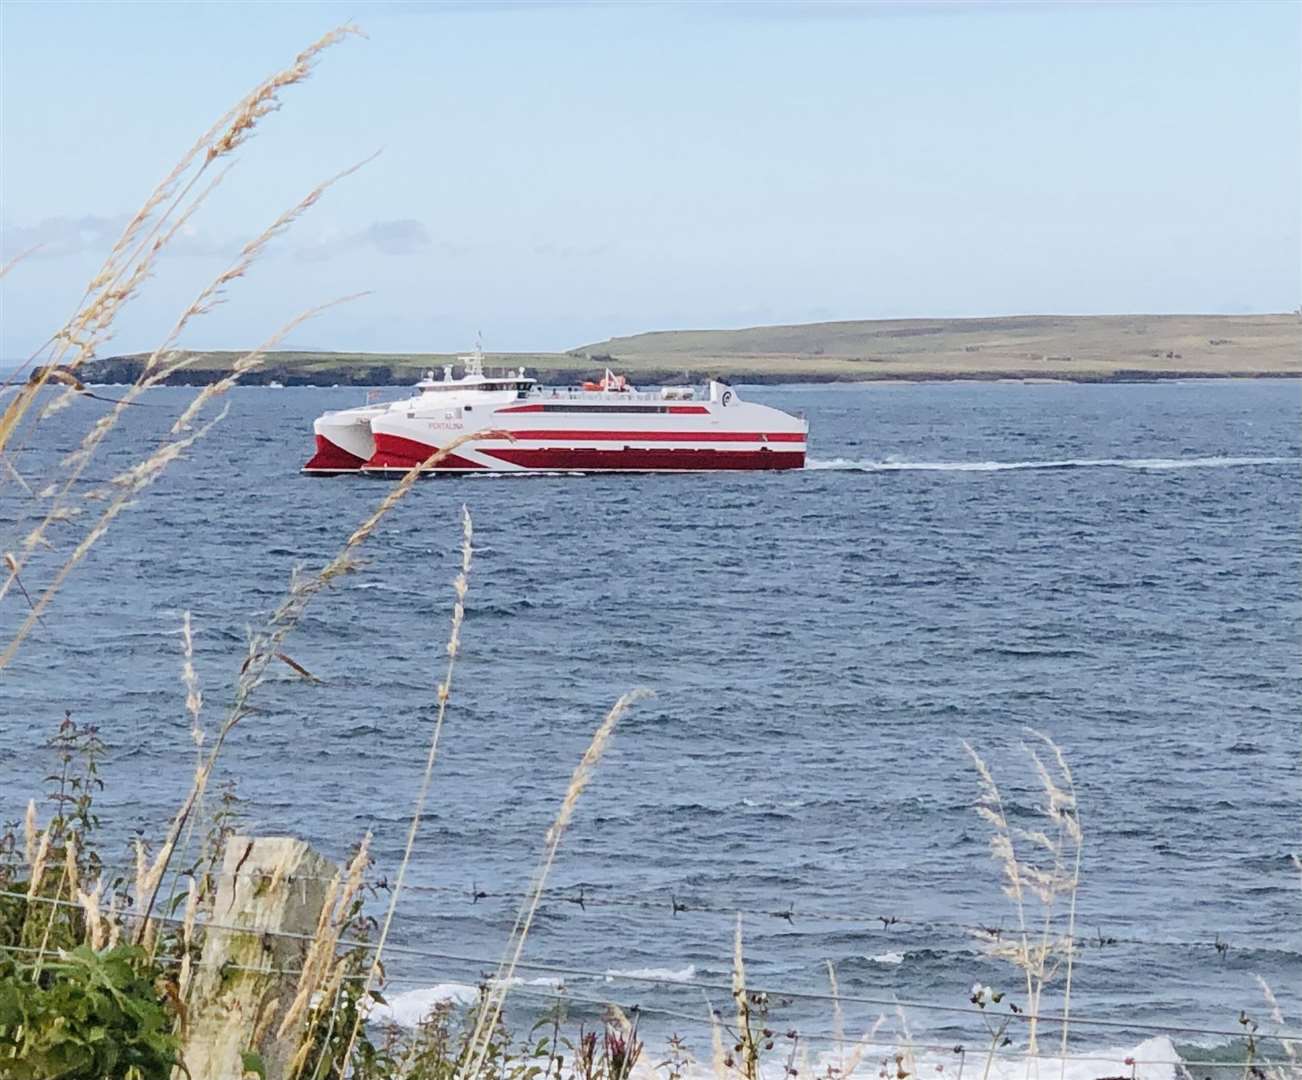 The Pentalina arriving at Gills harbour with Stroma in the background, by Lyall Rennie.